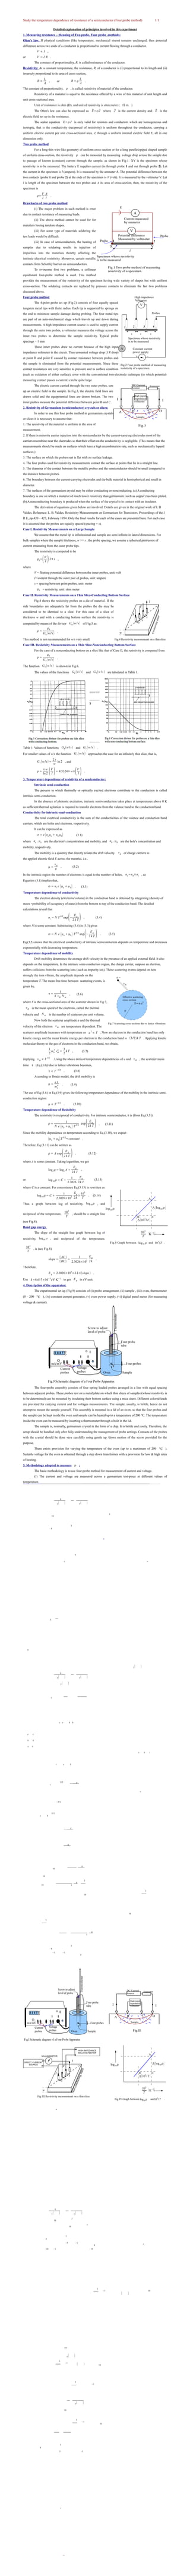 Study the temperature dependence of resistance of a semiconductor (Four probe method) 1/1
Detailed explanation of principles involved in this experiment
1. Measuring resistance – Meaning of Two probe, Four probe -methods:
Ohm's law: If physical conditions (like temperature, mechanical stress) remains unchanged, then potential
difference across two ends of a conductor is proportional to current flowing through a conductor.
V ∝ I ,
or V = I R .
The constant of proportionality, R, is called resistance of the conductor.
Resistivity: At a constant temperature, the resistance, R, of a conductor is (i) proportional to its length and (ii)
inversely proportional to its area of cross-section,
R ∝
L
A
, or R = ρ
L
A
.
The constant of proportionality, ρ , is called resistivity of material of the conductor.
Resistivity of a material is equal to the resistance offered by a wire of this material of unit length and
unit cross-sectional area.
Unit of resistance is ohm (Ω), and unit of resistivity is ohm.meter ( Ω⋅m )
The Ohm's law can also be expressed as ⃗E=ρ⃗J where ⃗J is the current density and ⃗E is the
electric field set up in the resistance.
The scalar equation E=ρJ is only valid for resistors and conductors which are homogeneous and
isotropic, that is the conductivity (reciprocal of resistivity) is uniform throughout the conductor, carrying a
uniform electric current per unit cross-sectional area, J, through a uniform internal electric field E, all in one
dimension only.
Two probe method
For a long thin wire-like geometry of uniform cross-section or for a long parellelopiped shaped sample
of uniform cross-section, the resistivity ρ can be measured by measuring voltage drop across the sample due
to passage of known (constant) current through the sample, as shown in Fig.1. XY is the specimen whose
resistivity is to be measured. The battery E supplies current (in through probe 1 and out through probe 2). Let
the current in the specimen is I (ampere). It is measured by the ammeter A. The potential difference between the
two contacts (probe 1 and probe 2) at the ends of the specimen is V (volt). It is measured by the voltmeter V. Let
l is length of the specimen between the two probes and A its area of cross-section, then, the resistivity of the
specimen is
ρ=
V
I
A
l
.
Drawbacks of two probe method
(i) The major problem in such method is error
due to contact resistance of measuring leads.
(ii) The above method cannot be used for for
materials having random shapes.
(iii) For some type of materials soldering the
test leads would be difficult.
(iii) In case of semiconductors, the heating of
samples due to soldering results in injection of
impurities into the materials thereby affecting the
intrinsic electrical resistivity. Moreover, certain metallic
contacts form Schottky barrier on semiconductors.
To overcome first two problems, a collinear
equidistant four-probe method is used. This method
provides the measurement of the resistivity of the specimen having wide variety of shapes but with uniform
cross-section. The soldering contacts are replaced by pressure contacts to eliminate the last two problems
discussed above.
Four probe method
The 4-point probe set up (Fig.2) consists of four equally spaced
tungsten metal tips with finite radius. Each tip is supported by springs on
the end to minimize sample damage during probing. The four metal tips
are part of an auto-mechanical stage which travels up and down during
measurements. A high impedance current source is used to supply current
through the outer two probes, a voltmeter measures the voltage across the
inner two probes to determine the sample resistivity. Typical probe
spacings ~ 1 mm
These inner probes draw no current because of the high input
impedance voltmeter in the circuit. Thus unwanted voltage drop (I R drop)
at point B and point C caused by contact resistance between probes and
the sample is eliminated from the potential measurements. Since these
contact resistances are very sensitive to pressure and to surface condition
(such as oxidation of either surface), error with the conventional two-electrode technique (in which potential-
measuring contact passes a current) can be quite large.
The electric current carried through the two outer probes, sets
up an electric field in the sample. In Fig.3, the electric field lines are
drawn solid and the equipotential lines are drawn broken. The two
inner probes measure the potential difference between point B and C.
2. Resistivity of Germanium (semiconductor) crystals or slices:
In order to use this four probe method in germanium crystals
or slices it is necessary to assume that:
1. The resistivity of the material is uniform in the area of
measurement.
2. If there is minority carrier injection into the semiconductor by the current-carrying electrodes most of the
carriers recombine near the electrodes so that their effect on the conductivity is negligible. (This means that the
measurements should be made on surfaces which have a high recombination rate, such as mechanically lapped
surfaces.)
3. The surface on which the probes rest is flat with no surface leakage.
4. The four probes used for resistivity measurements contact the surface at points that lie in a straight line.
5. The diameter of the contact between the metallic probes and the semiconductor should be small compared to
the distance between probes.
6. The boundary between the current-carrying electrodes and the bulk material is hemispherical and small in
diameter.
7. The surfaces of the germanium crystal may be either conducting or nonconducting. (a) A conducting
boundary is one on which a material of much lower resistivity than germanium (such as copper) has been plated.
(b) A nonconducting boundary is produced when the surface of the crystal is in contact with an insulator.
The derivation of equations given below are involved. Details are given in the original work of L B
Valdes. Reference: L. B. Valdes, Resistivity Measurements on Germanium for Transistors, Proceedings of the I
R E, pp.420 – 427, February 1954. Only the final results for each of the cases are presented here. For each case
it is assumed that the probes are equally spaced (spacing = s).
Case I. Resistivity Measurements on a Large Sample
We assume that the metal tip is infinitesimal and sample are semi infinite in lateral dimensions. For
bulk samples where the sample thickness, w >> s , the probe spacing, we assume a spherical protrusion of
current emanating from the outer probe tips.
The resistivity is computed to be
ρ0=(V
I )2π s ,
where
V = floating potential difference between the inner probes, unit: volt
I =current through the outer pair of probes, unit: ampere
s = spacing between point probes, unit: meter
ρ0 = resistivity, unit: ohm meter
Case II. Resistivity Measurements on a Thin Slice-Conducting Bottom Surface
Fig.4 shows the resistivity probes on a die of material. If the
side boundaries are adequately far from the probes the die may be
considered to be identical to a slice. For this case of a slice of
thickness w and with a conducting bottom surface the resistivity is
computed by means of the divisor G6 (w /s) of Fig.5 as:
ρ =
ρ0
G6 (w /s) .
This method is not recommended for w/s very small.
Case III. Resistivity Measurements on a Thin Slice-Nonconducting Bottom Surface
For the case of a nonconducting bottom on a slice like that of Case II, the resistivity is computed from
ρ =
ρ0
G7 (w /s) .
The function G7 (w /s) is shown in Fig.6.
The values of the functions G6 (w /s) and G7 (w /s) are tabulated in Table 1.
Table 1: Values of functions G6 (w /s) and G7 (w /s) .
For smaller values of w/s the function G7 (w /s) approaches the case for an infinitely thin slice, that is,
G7 (w /s) =
2 s
w
ln 2 , and
ρ =
π w
ln 2 (V
I )= 4.5324×w×(V
I ) .
3. Temperature dependence of resistivity of a semiconductor:
Intrinsic semi-conduction
The process in which thermally or optically excited electrons contribute to the conduction is called
intrinsic semi-conduction.
In the absence of photonic excitation, intrinsic semi-conduction takes place at temperatures above 0 K
as sufficient thermal agitation is required to transfer electrons from the valence band to the conduction band.
Conductivity for intrinsic semi-conduction
The total electrical conductivity is the sum of the conductivities of the valence and conduction band
carriers, which are holes and electrons, respectively.
It can be expressed as
σ = e (neμe + nh μh) (3.1)
where ne , μe are the electron's concentration and mobility, and nh , μh are the hole's concentration and
mobility, respectively.
The mobility is a quantity that directly relates the drift velocity vd of charge carriers to
the applied electric field E across the material, i.e.,
μ =
vd
E
. (3.2)
In the intrinsic region the number of electrons is equal to the number of holes, ne=nh≡ni , so
Equation (3.1) implies that,
σ = ni e (μe + μh) . (3.3)
Temperature dependence of conductivity
The electron density (electrons/volume) in the conduction band is obtained by integrating (density of
states×probability of occupancy of states) from the bottom to top of the conduction band. The detailed
calculations reveal that
ni = N T3/2
exp(−
Eg
2 k T ) , (3.4)
where N is some constant. Substituting (3.4) in (3.3) gives
σ = N e (μe + μh) T3/ 2
exp(−
Eg
2 k T ) . (3.5)
Eq.(3.5) shows that the electrical conductivity of intrinsic semiconductors depends on temperature and decreases
exponentially with decreasing temperature.
Temperature dependence of mobility
Drift mobility determines the average drift velocity in the presence of an applied external field. It also
depends on the temperature. In the intrinsic semi-conduction region, the charge carrier, suppose an electron,
suffers collisions from the scattering ions (such as impurity ion). These scattering events depend on how
strongly the ions vibrate, the amplitude depends on the
temperature T. The mean free time between scattering events, is
given by,
τ =
1
S vth N sc
, (3.6)
where S is the cross-sectional area of the scatterer shown in Fig.7,
vth is the mean speed of the electrons, called the thermal
velocity and N sc is the number of scatterers per unit volume.
Now both the scatterer amplitude a and the thermal
velocity of the electron vth are temperature dependent. The
scatterer amplitude increases with temperature as a2
∝ T . Now an electron in the conduction band has only
kinetic energy and the mean kinetic energy per electron in the conduction band is (3/2)k T . Applying kinetic
molecular theory to the gas of electrons in the conduction band, we obtain,
1
2
me
∗
vth
2
=
3
2
k T , (3.7)
implying vth ∝ T 1/2
. Using the above derived temperature dependencies of a and vth , the scatterer mean
time τ (Eq.(3.6)) due to lattice vibrations becomes,
τ ∝ T−3 /2
. (3.8)
According to Drude model, the drift mobility is
μ =
e τ
me
∗ . (3.9)
The use of Eq.(3.8) in Eq.(3.9) gives the following temperature dependence of the mobility in the intrinsic semi-
conduction region:
μ ∝ T−3/ 2
. (3.10)
Temperature dependence of Resistivity
The resistivity is reciprocal of conductivity. For intrinsic semiconductor, it is (from Eq.(3.5))
ρ =
1
N e (μe + μh) T3/ 2
exp( Eg
2k T ) . (3.11)
Since the mobility dependence on temperature according to Eq.(3.10), we expect
(μe + μh)T3/ 2
≈constant .
Therefore, Eq.(3.11) can be written as
ρ = A exp( E g
2 k T ) . (3.12)
where A is some constant. Taking logarithm, we get
logeρ = loge A +
Eg
2k T
,
or log10ρ = C +
1
2.3026
Eg
2k T
(3.13)
where C is a constant. For convenience Eq.(3.13) is rewritten as
log10ρ = C +
1
2.3026×103
Eg
2k
×
103
T
. (3.14)
Thus a graph between log of resistivity, log10ρ , and
reciprocal of the temperature,
103
T
, should be a straight line
(see Fig.8).
Band gap energy
The slope of the straight line graph between log of
resistivity, log10 ρ , and reciprocal of the temperature,
103
T
, is (see Fig.8)
slope =
(AC)
(BC)
=
1
2.3026×103
Eg
2k
.
Therefore,
Eg = 2.3026×103
×2 k×(slope) .
Use k =8.617×10−5
eV K−1
to get Eg in eV unit.
4. Description of the apparatus:
The experimental set up (Fig.9) consists of (i) probe arrangement, (ii) sample , (iii) oven, thermometer
(0 – 200 Co
), (iv) constant current generator, (v) oven power supply, (vi) digital panel meter (for measuring
voltage & current).
The four-probe assembly consists of four spring loaded probes arranged in a line with equal spacing
between adjacent probes. These probes rest on a metal plate on which thin slices of samples (whose resistivity is
to be determined) can be mounted by insulating their bottom surface using a mica sheet. Different colored leads
are provided for carrying current and for voltages measurements. The sample, usually, is brittle, hence do not
attempt to mount the sample yourself. This assembly is mounted in a lid of an oven, so that the four probes and
the sample can be kept inside the oven and sample can be heated up to a temperature of 200 °C. The temperature
inside the oven can be measured by inserting a thermometer through a hole in the lid.
The sample is, normally, germanium crystal in the form of a chip. It is brittle and costly. Therefore, the
setup should be handled only after fully understanding the management of probe settings. Contacts of the probes
with the crystal should be done very carefully using gentle up /down motion of the screw provided for the
purpose.
There exists provision for varying the temperature of the oven (up to a maximum of 200 Co
).
Suitable voltage for the oven is obtained through a step down transformer with a provision for low & high rates
of heating.
5. Methodology adopted to measure ρ :
The basic methodology is to use four-probe method for measurement of current and voltage.
(I) The current and voltage are measured across a germanium test-piece at different values of
temperature.
(II) From the measurements, the resistivity, ρ , is calculated by using the following relation
corresponding to each temperature:
ρ =
ρ0
G7 (w /s)
=(V
I ) 2π s
G7 (w /s)
.
(III) The variation of semiconductor resistivity with temperature is inferred by plotting a graph between
log of resistivity, log10ρ , and reciprocal of the temperature, 103
/T . A linear plot is obtained.
(III) From the linear plot, slope is determined. Using it, energy gap of germanium is calculated.
Eg = 2.3026×103
×2 k×(slope) .
Experiment A - 4
Object: Study of the temperature dependence of resistivity of a semiconductor (Four probe method).
Apparatus: Four probe apparatus (spring loaded four probes, germanium crystal in the form of a chip, oven for
variation of temperature (to about 150 Co
), thermometer, constant current power supply, oven power supply,
high impedance voltmeter, milli-ammeter to measure, respectively, voltage and current through 4-point probes).
Theory:
Resistivity of semiconductor
The resistivity of germanium is measured with the help of four probes (Fig.I). The outer probes are
used for passing a constant current through the germanium sample. The electric current carried through the two
outer probes, sets up an electric field in the sample. In Fig.II, the electric field lines are drawn solid and the
equipotential lines are drawn broken. The two inner probes measure the potential difference between point B
and C using a high impedance voltmeter.
For bulk samples where the sample thickness, w >> s , the probe spacing, the resistivity is calculated
using the relation:
ρ0=(V
I )2π s , (1)
where
V = floating potential difference between the inner probes, unit: volt
I =current through the outer pair of probes, unit: ampere
s = spacing between point probes, unit: meter
ρ0 = resistivity, unit: ohm meter
Fig.III shows the resistivity probes on a die of material. If the side boundaries are adequately far from
the probes the die may be considered to be identical to a slice. For this case of a slice of thickness w and with a
non conducting bottom surface the resistivity is computed by means of the divisor G7 (w /s) as:
ρ =
ρ0
G7 (w /s)
=(V
I ) 2π s
G7 (w /s)
. (2)
The values and graph for G7 (w /s) are given in the lab manual. For (w /s)≤0.5 , we may use the following
value (obtained for the case of infinitely thin slice):
G7 (w /s) =
2 s
w
ln 2 =
1.3863
(w /s)
. (3)
The temperature dependence of resistivity of a semiconductor
The total electrical conductivity of a semiconductor sample is the sum of the conductivities of the
valence and conduction band carriers, which are holes and electrons, respectively.
σ = e (neμe + nh μh) (4)
where
ne , μe are the electron's concentration and mobility, and
nh , μh are the hole's concentration and mobility,
μe ,μh Are the electron and the hole mobilities.
In the intrinsic region the number of electrons is equal to the number of holes, ne=nh≡ni , so
the conductivity becomes
σ = ni e (μe + μh) . (5)
The detailed calculations reveal that the electron density (number/volume) depends on temperature as
follows:
ni = N T3/2
exp(−
Eg
2 k T ) , (6)
where N is some constant. The temperature dependence of the mobility in the intrinsic semi-conduction region is
of the form:
μ ∝ T−3/ 2
. (7)
Therefore
(μe + μh)T3/ 2
≈constant
Use of this fact gives
σ = constant× exp(−
Eg
2 k T ) . (8)
The resistivity is reciprocal of conductivity. Therefore, for intrinsic semiconductor, it is (from Eq.(8))
ρ = A exp( E g
2 k T ) . (9)
where A is some constant. The resistivity of a semiconductor rises exponentially on decreasing the temperature.
Taking logarithm, we get
log10ρ = C +
1
2.3026
Eg
2k T
(10)
where C=log10 A is another constant. For convenience Eq.(10) is rewritten as
log10ρ = C +
1
2.3026×103
Eg
2k
×
103
T
. (11)
Thus a graph between log of resistivity, log10 ρ , and reciprocal of the temperature,
103
T
, should be a
straight line (Fig.IV).
Band gap energy
The slope of the straight line graph between log of resistivity, log10 ρ , and reciprocal of the
temperature,
103
T
, is (see Fig.IV)
slope =
(AC)
(BC)
=
1
2.3026×103
Eg
2k
.
Therefore,
Eg = 2.3026×103
×2 k×(slope) .
We use k =8.617×10−5
eV K−1
to get Eg in eV unit.
Figures:
Method:
(1) The settings of 4-point probes on the semiconductor chip is a delicate process. So first understand well
the working of the apparatus. The semiconductor chip and probe set is costly.
(2) Note the values of probe spacing (s) and the thickness (w) of the semiconductor chip. Note the type of
semiconductor (germanium or something else).
(3) Make the circuit as shown in Fig.I & III. Put the sample in the oven (normally already placed by lab
instructor) at room temperature.
(4) Carefully, with the help of screw and delicate up/down movements, touch (kelvin connection) the
probes to the semiconductor chip.
(5) Pass a milliampere range current (say 2 mA) in the sample using constant current power supply.
(6) The reading of the current through the sample is measured using milliammeter provided for this
purpose. The voltage is measured by a high impedance millivoltmeter connected to the inner probes.
The readings can be taken alternately on digital meter provided for this purpose.
(7) Note temperature of sample (oven) using thermometer inserted in the oven for this purpose.
(8) The oven temperature is increased a little, and its temperature noted after reaching steady state. Again
the constant current reading (advised to be kept the same) and the corresponding voltage readings are
taken.
(9) Repeat the procedure for different temperatures. Note the data in the observation table.
(10) For each temperature, calculate the resistivity by using the relation
ρ =
ρ0
G7 (w /s)
=(V
I ) 2π s
G7 (w /s)
.
(11) Compute log10 ρ and 103
/T and write it in the observation table.
(12) Plot a graph between log10 ρ and 103
/T . It is a straight line. Find its slope.
(13) Calculate the band gap using formula
Eg = 2.3026×103
×2 k×(slope) .
Use use k =8.617×10−5
eV K−1
to get Eg in eV unit. Note that up to four-significant digits,
k =1.3806×10−23
J K−1
, and 1eV=1.602×10−19
J .
Observations:
1. Semiconductor chip material = Germanium (verify from your lab manual)
2. Spacing (distance) between the probes, s = ….........mm = ….........m.
3. Thickness of the sample, w = ….........mm = ….........m.
Table 1: Voltage across the inner probes for a constant current at different sample temperatures
(a) Constant current passed through the sample = ….......mA
S.NO. Temperature
T (K)
Voltage across
inner probes
V (mV)
103
T
(K−1
)
(calculated)
Resistivity
ρ(Ω m)
(calculated)
log10 ρ
(calculated)
1
2
3
...
...
...
(If instructed, make one more table with a different value of constant current in the sample.)
Calculations:
1. For the given sample
w
s
= .........
2. The correction factor G7 (w /s)=........
3. Calculation of
103
T
(K−1
) , ρ(Ω m) and log10 ρ
(I) For S.No. 1 of Table 1
(i) Temperature T = ….....K. Therefore
103
T
=...........(K−1
) .
(ii) Resistivity is
ρ = (V
I ) 2 πs
G7(w/ s)
=.............Ω m
log10ρ=...........
(II) Repeat calculations for other S.Nos.
4. Slope of the graph between
103
T
(K−1
) and log10 ρ ) is
slope =
AC
BC
=
.........
........
= ...........
5. Energy band gap
E g = 2.3026×103
×2 k×(slope)
=2.3026×103
×2×8.617×10−5
×(slope)=................. eV
Result:
1. The temperature dependence of the resistivity of semiconductor (germanium) chip is as shown in the
graph. The resistivity increases exponentially with the increase in 1/T. That is as at low temperatures
resistivity is more and at high temperatures the resistivity is less.
2. The energy band gap for the given semiconductor (germanium) is = …......eV.
Precautions:
1. The surface of the semiconductor should be flat
2. All the four probes should be collinear.
3. The adjustment of 4-point probes should be done gently, as the semiconductor chip is brittle.
4. The voltage should be measured using inner probes only using a high impedance millivoltmeter.
5. Temperature of the oven should not exceed the limits set by manufacturer of the probes and chip set.
© 2012 – Sardar Singh www.sardarsinghsir.com
Specimen whose resistivity
is to be measured
V
Probes
1 2
High impedance
Voltmeter
Fig.2 Four probe method of measuring
resistivity of a specimen.
Constant current
power supply
3 4
A
s s s
+ −
 